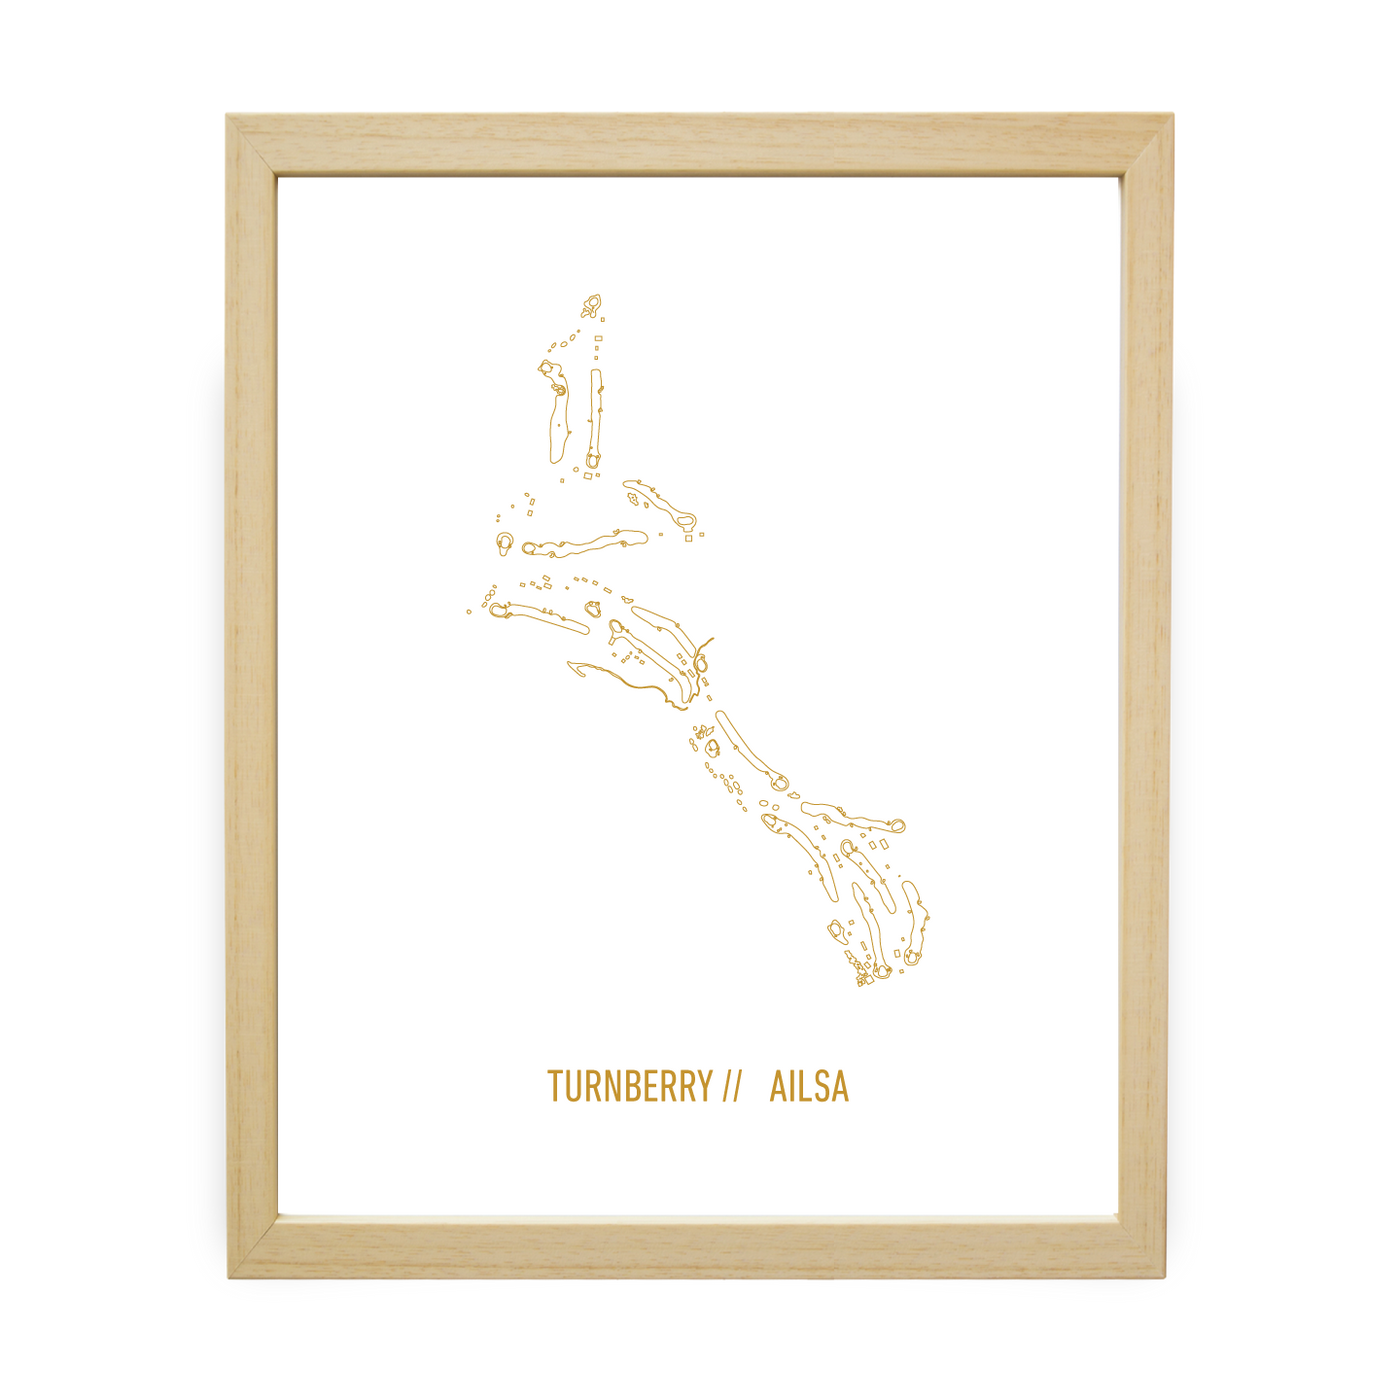 Turnberry - Ailsa Course (Gold Collection)